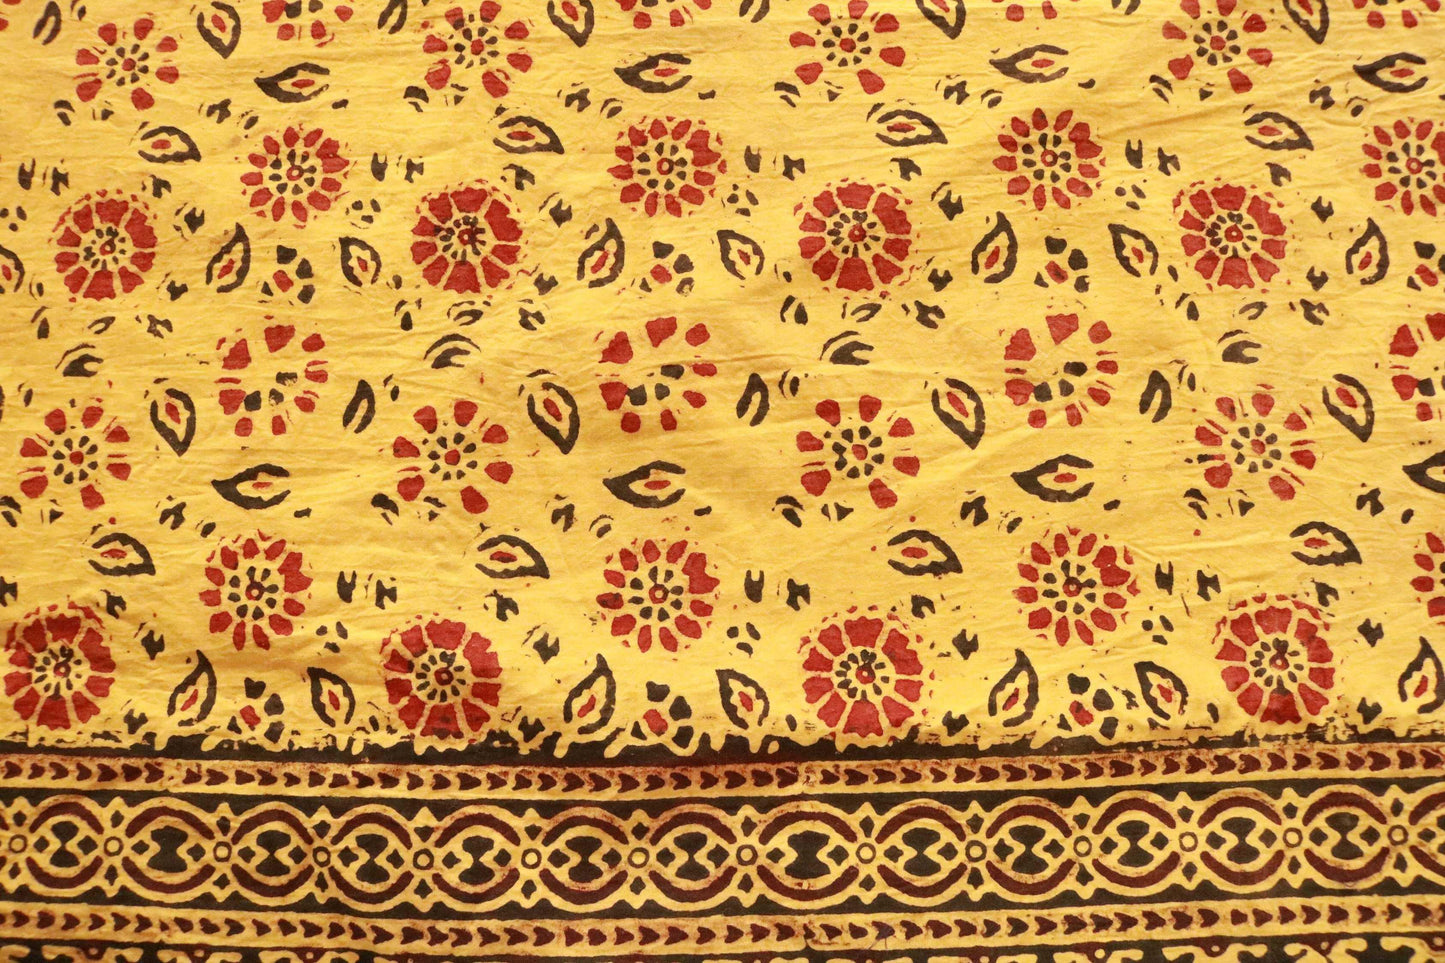 Yellow saffron hand-dyed block print table cover with 8 matching napkins - an eco-friendly and ethically made dining ensemble by Ethimaart.